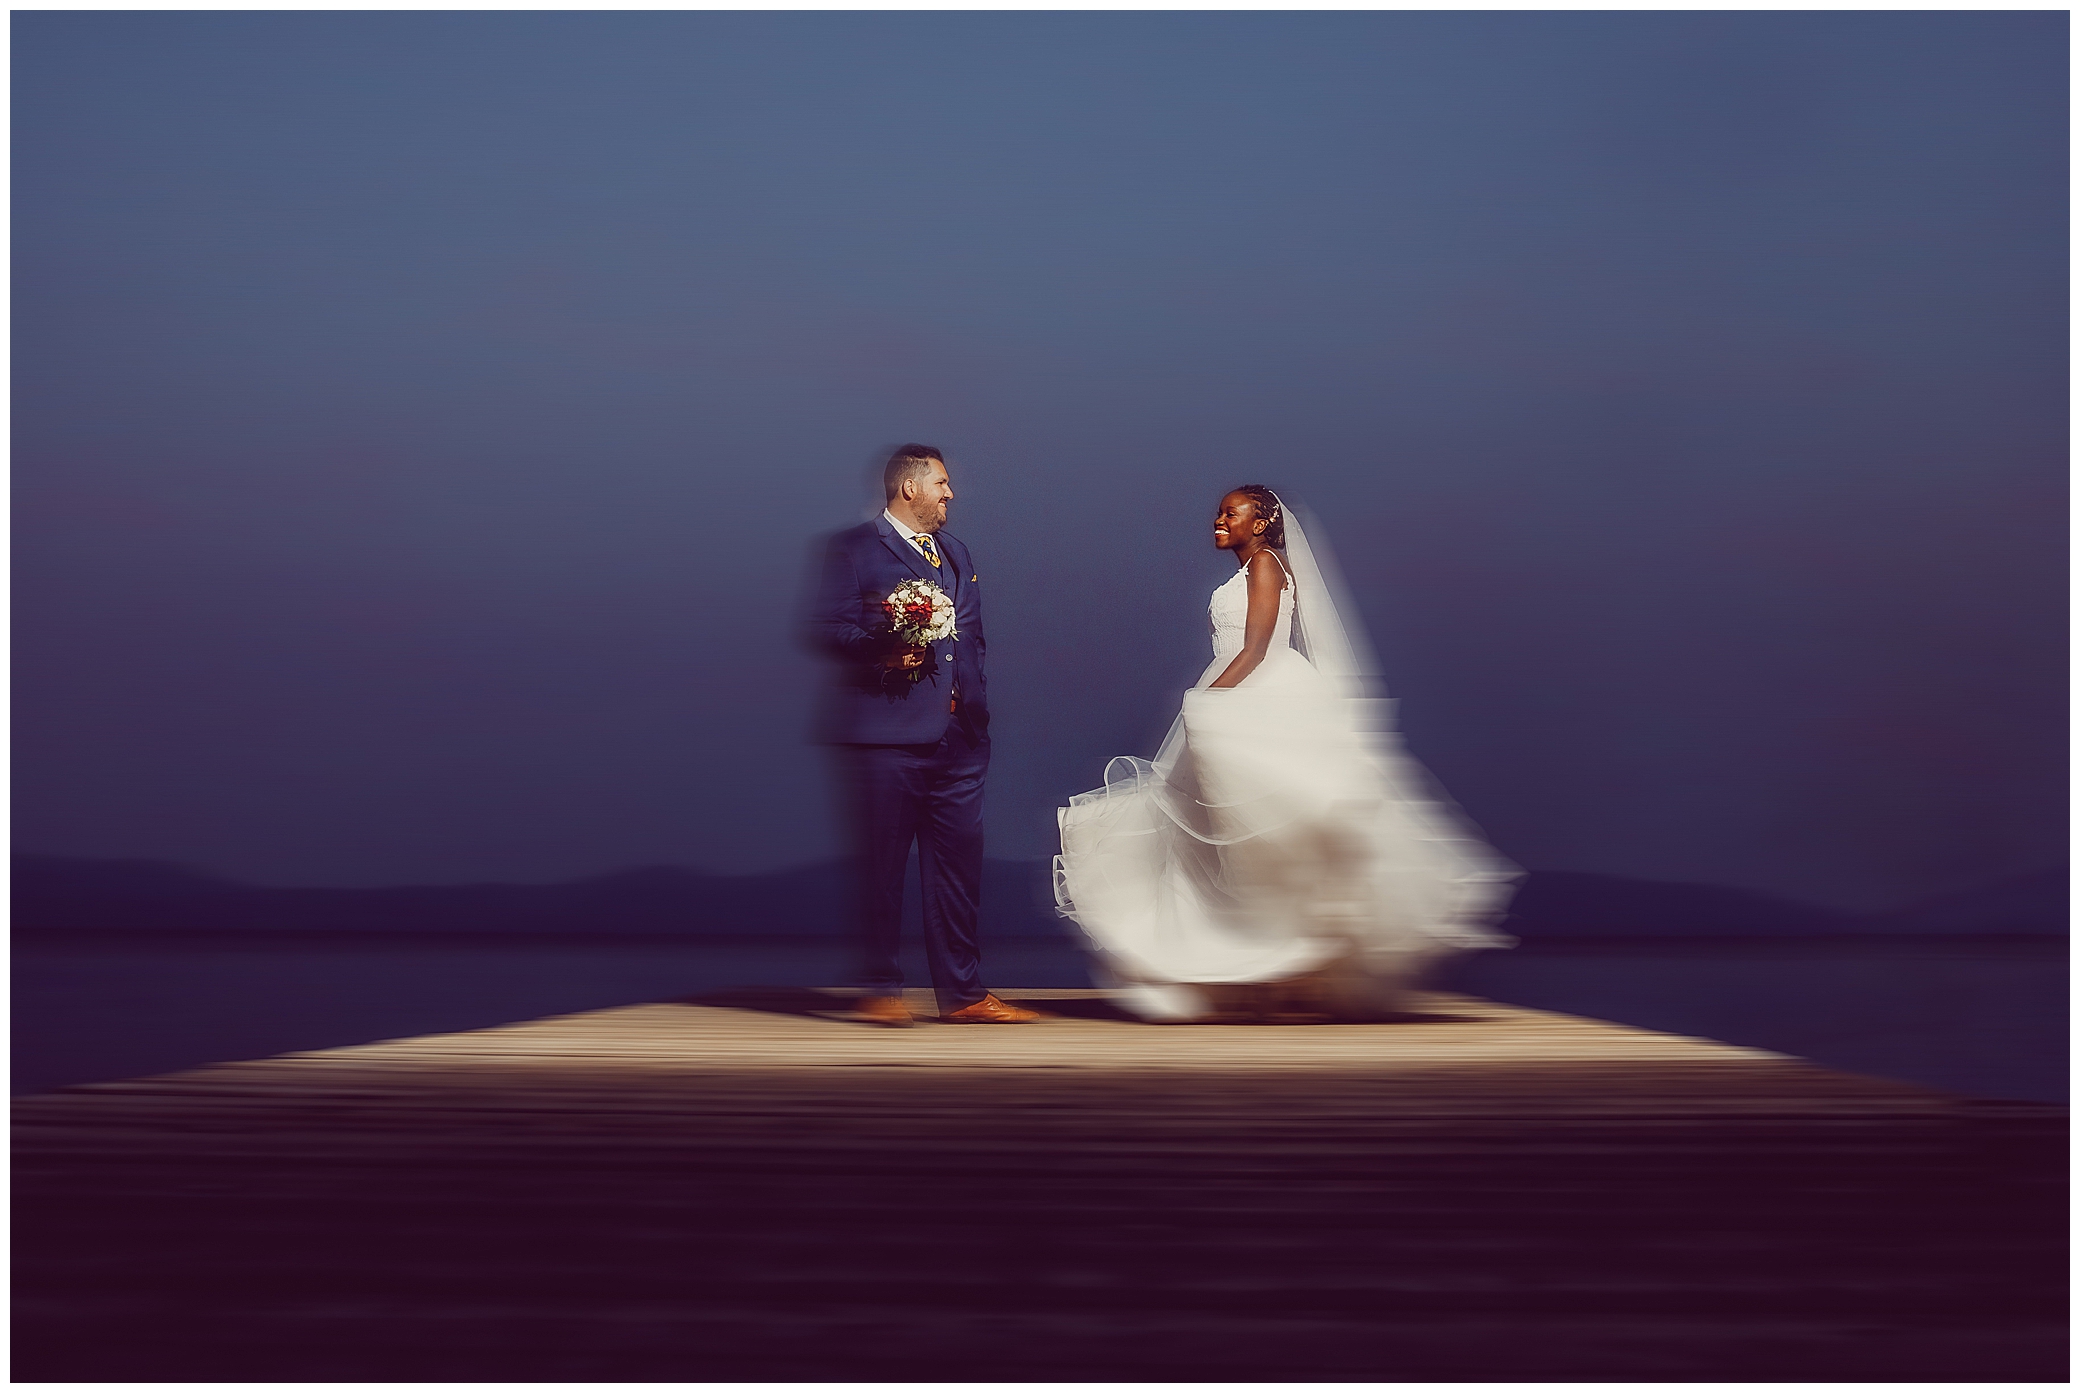 Bride dances for Groom on South Lake Tahoe Pier photographed by Dee and Kris Photography